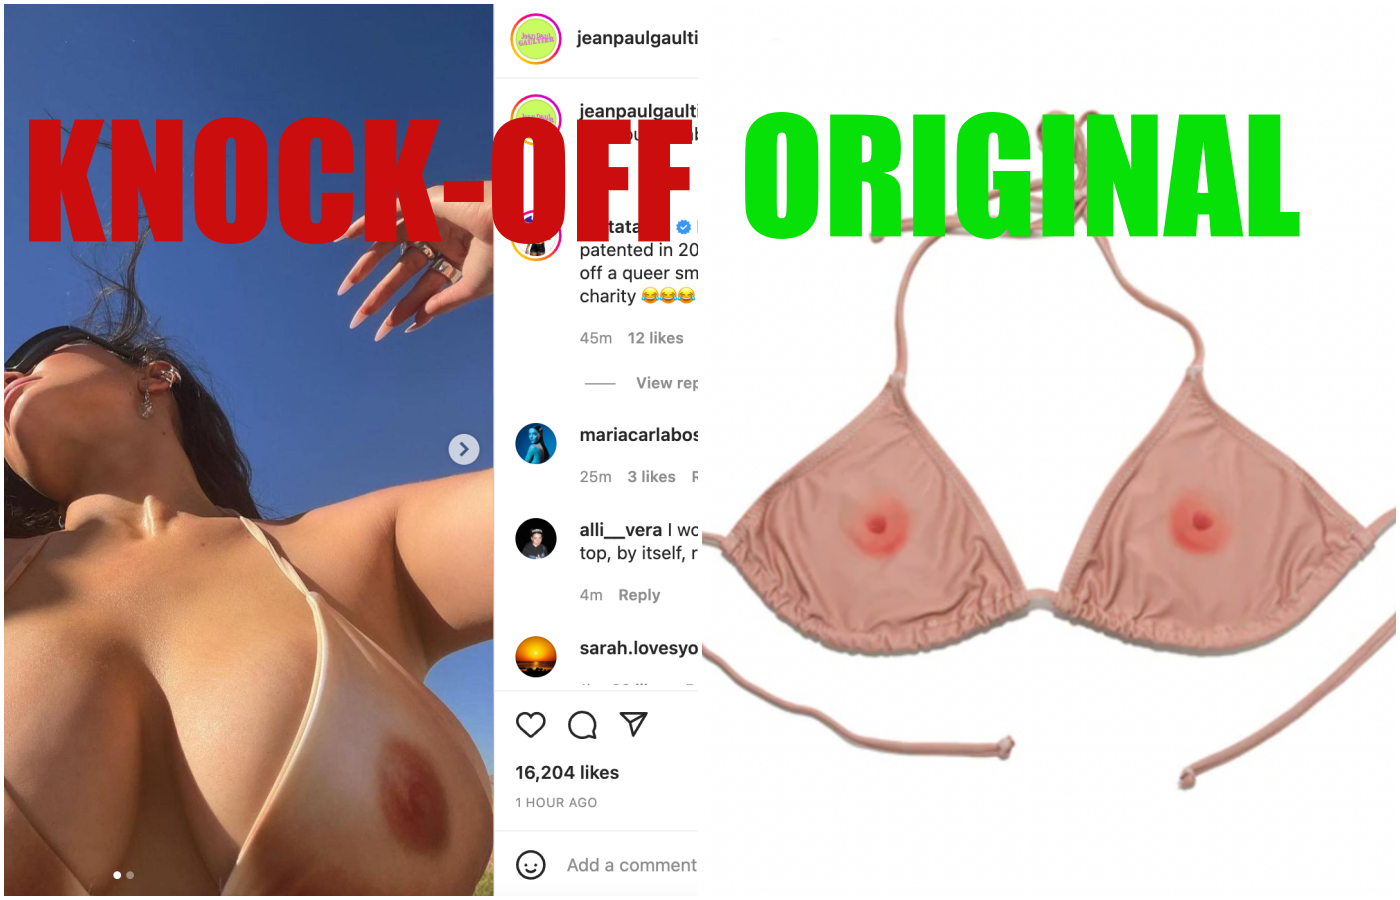 Jean Paul Gaultier Ripped Us Off. Here's How To Get The ORIGINAL Nipple Bikini Kylie Jenner Wore on Instagram.